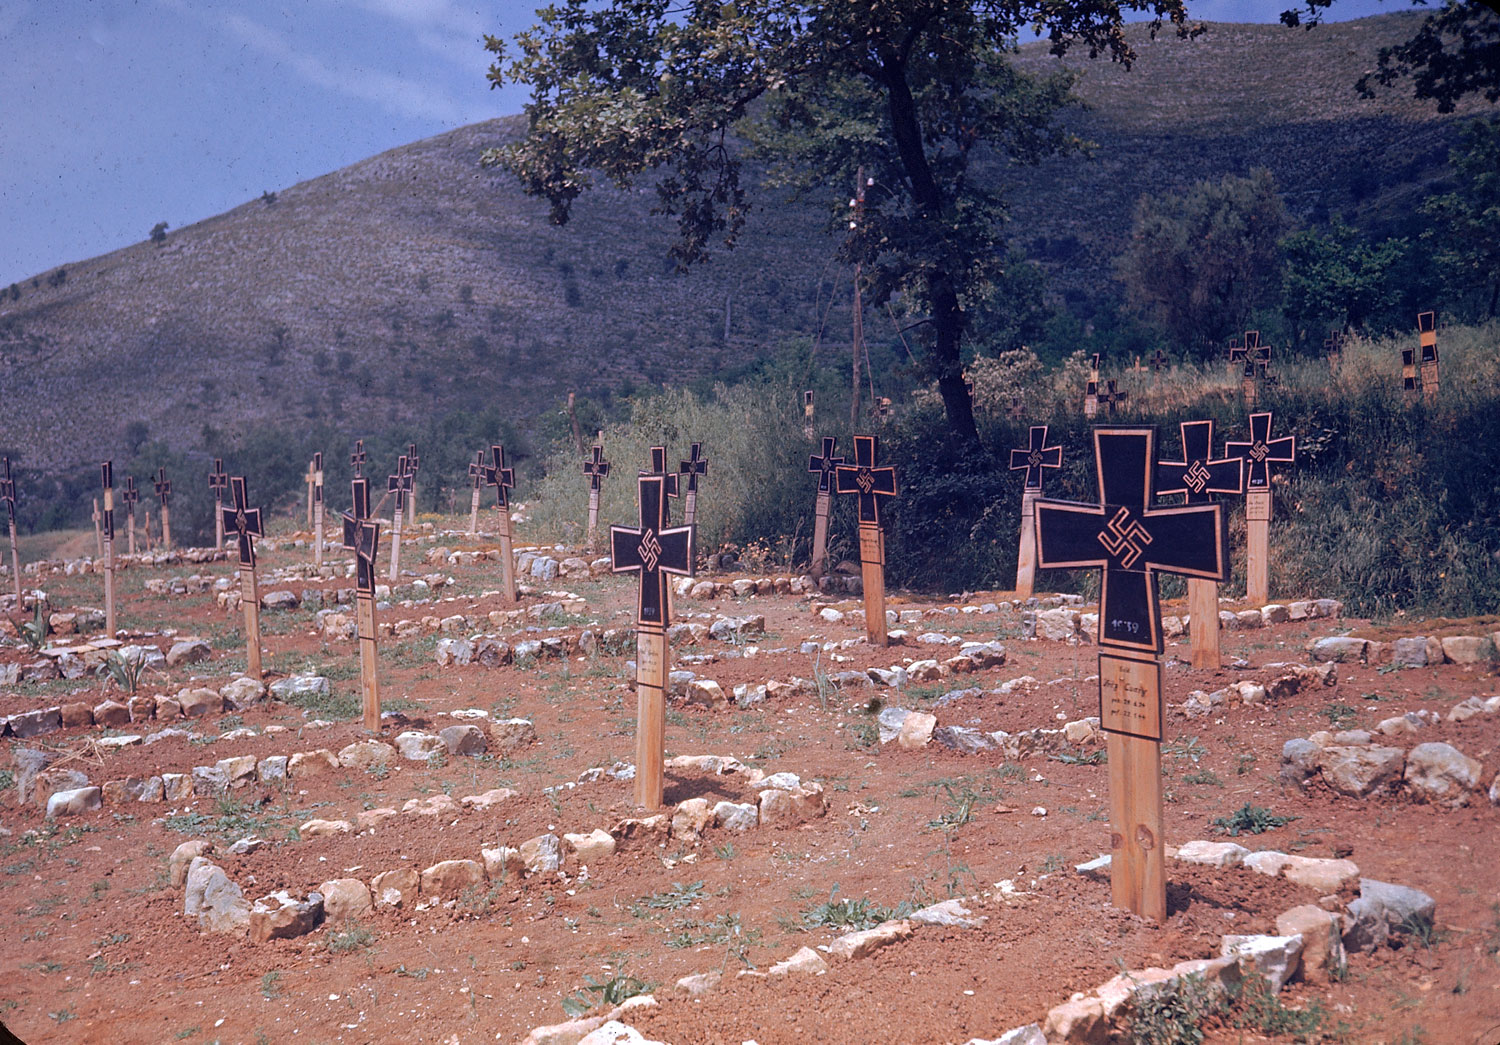 A German graveyard along the Esperia Road, photographed during the Allied drive towards Rome, World War II.